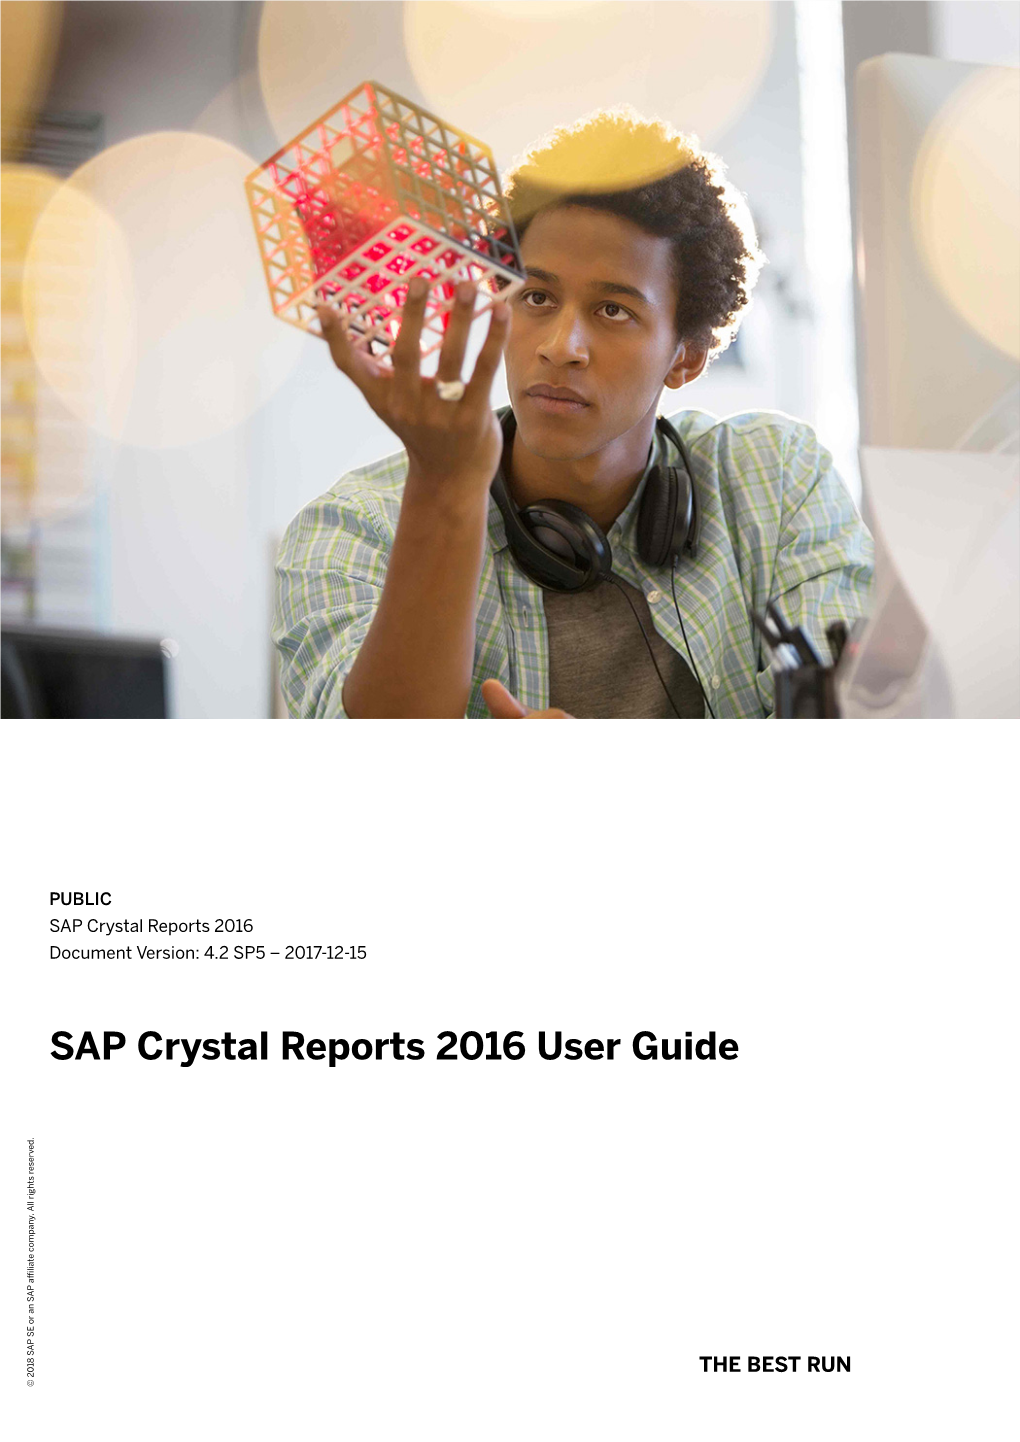 SAP Crystal Reports 2016 User Guide Company